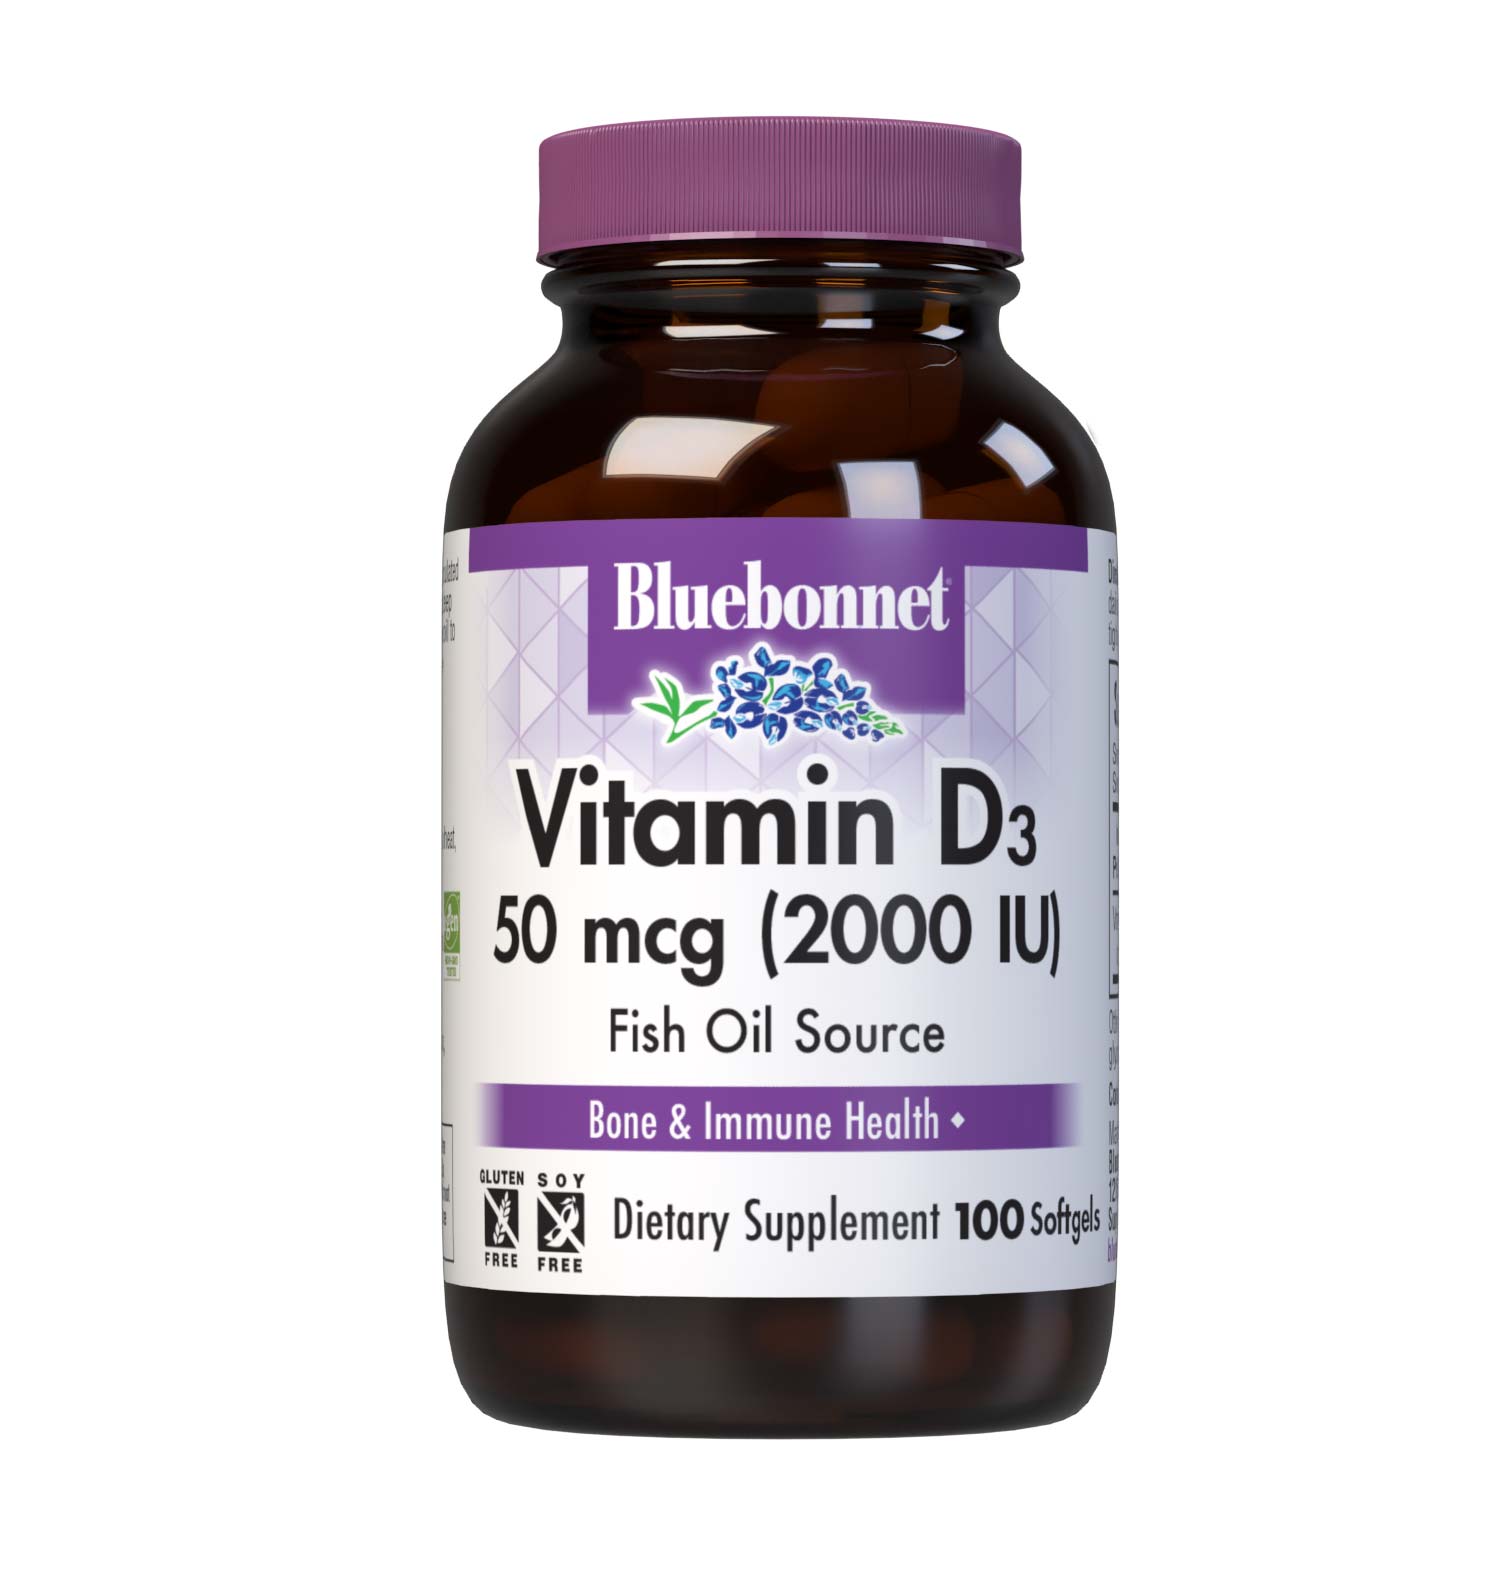 Bluebonnet’s Vitamin D3 50 mcg (2000 IU) Softgels are formulated with vitamin D3 (cholecalciferol) that supports strong healthy bones and immune function from molecularly distilled, deep sea, cold water, fish liver oil in a base of non-GMO safflower oil. #size_100 count